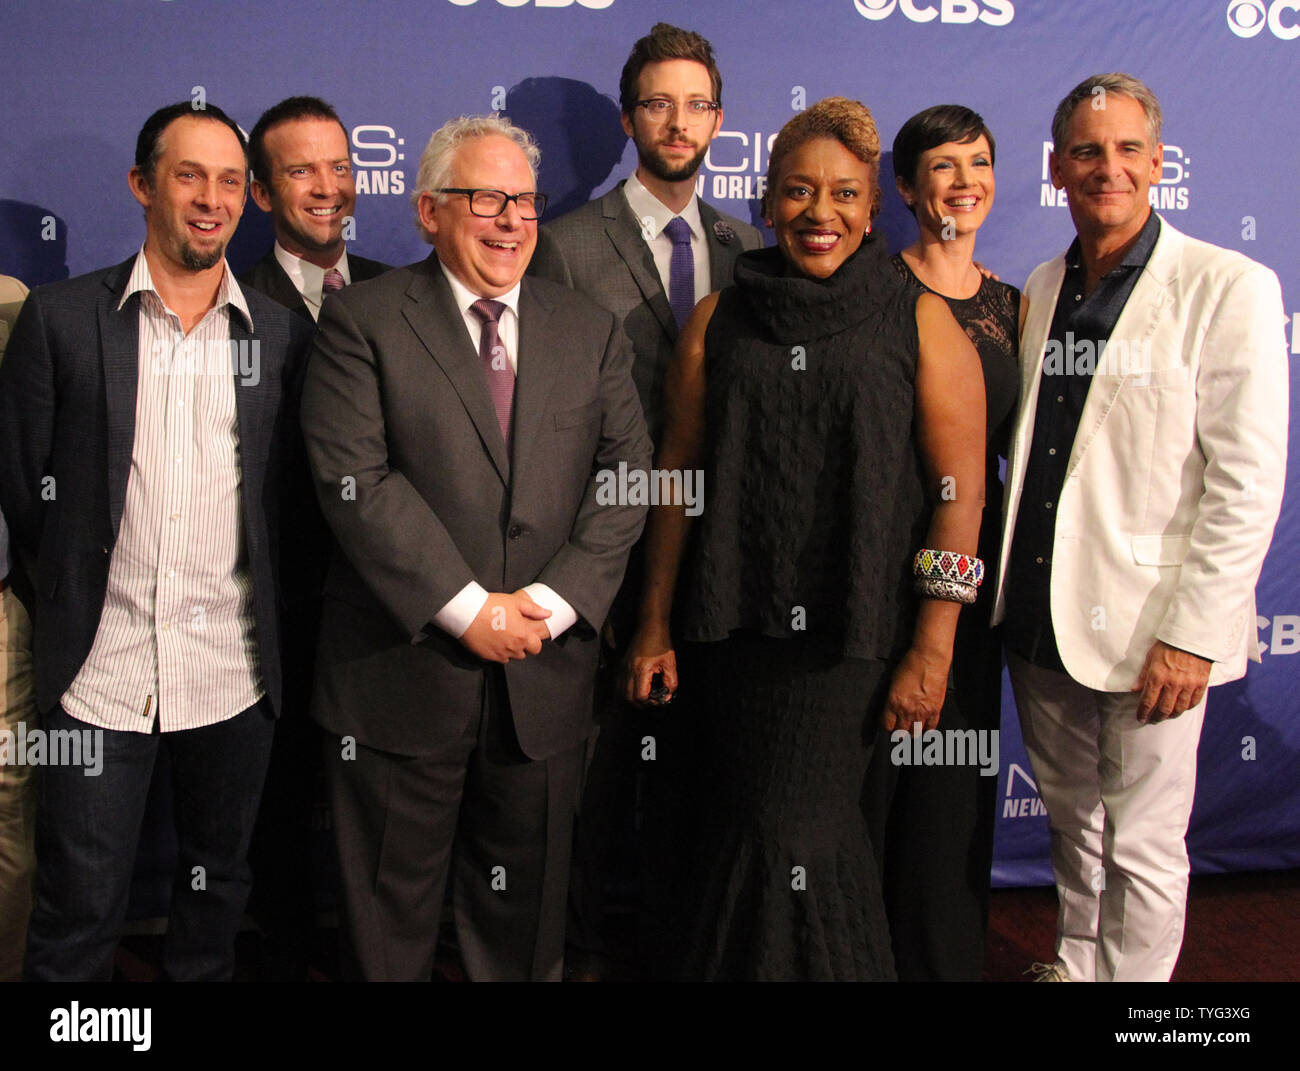 'NCIS: New Orleans' cast and producers arrive on the red carpet at the National WWII Museum in New Orleans for the premiere of the new television series airing on CBS this fall. From left, executive producer Jeffrey Lieber, actor Lucas Black, executive producer Gary Glasberg, and actors Rob Kerkovich, C.C.H. Pounder, Zoe McLellan and Scott Bakula, September 17, 2014.   UPI/A.J. Sisco Stock Photo